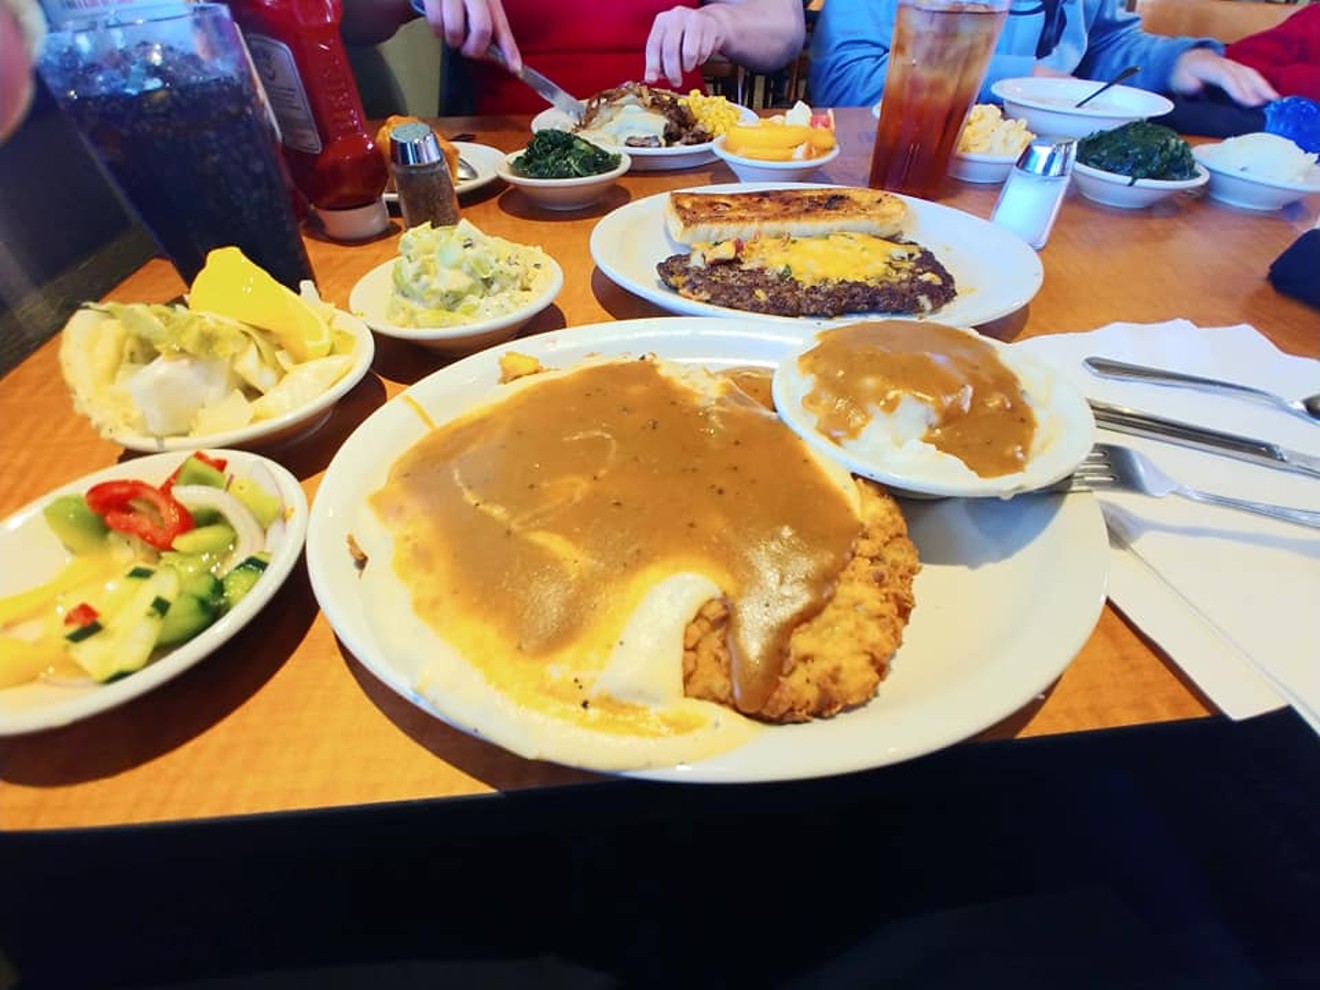 The chicken-fried steak is one of the most popular dishes at Luby's, although we're also partial to the fried fish.